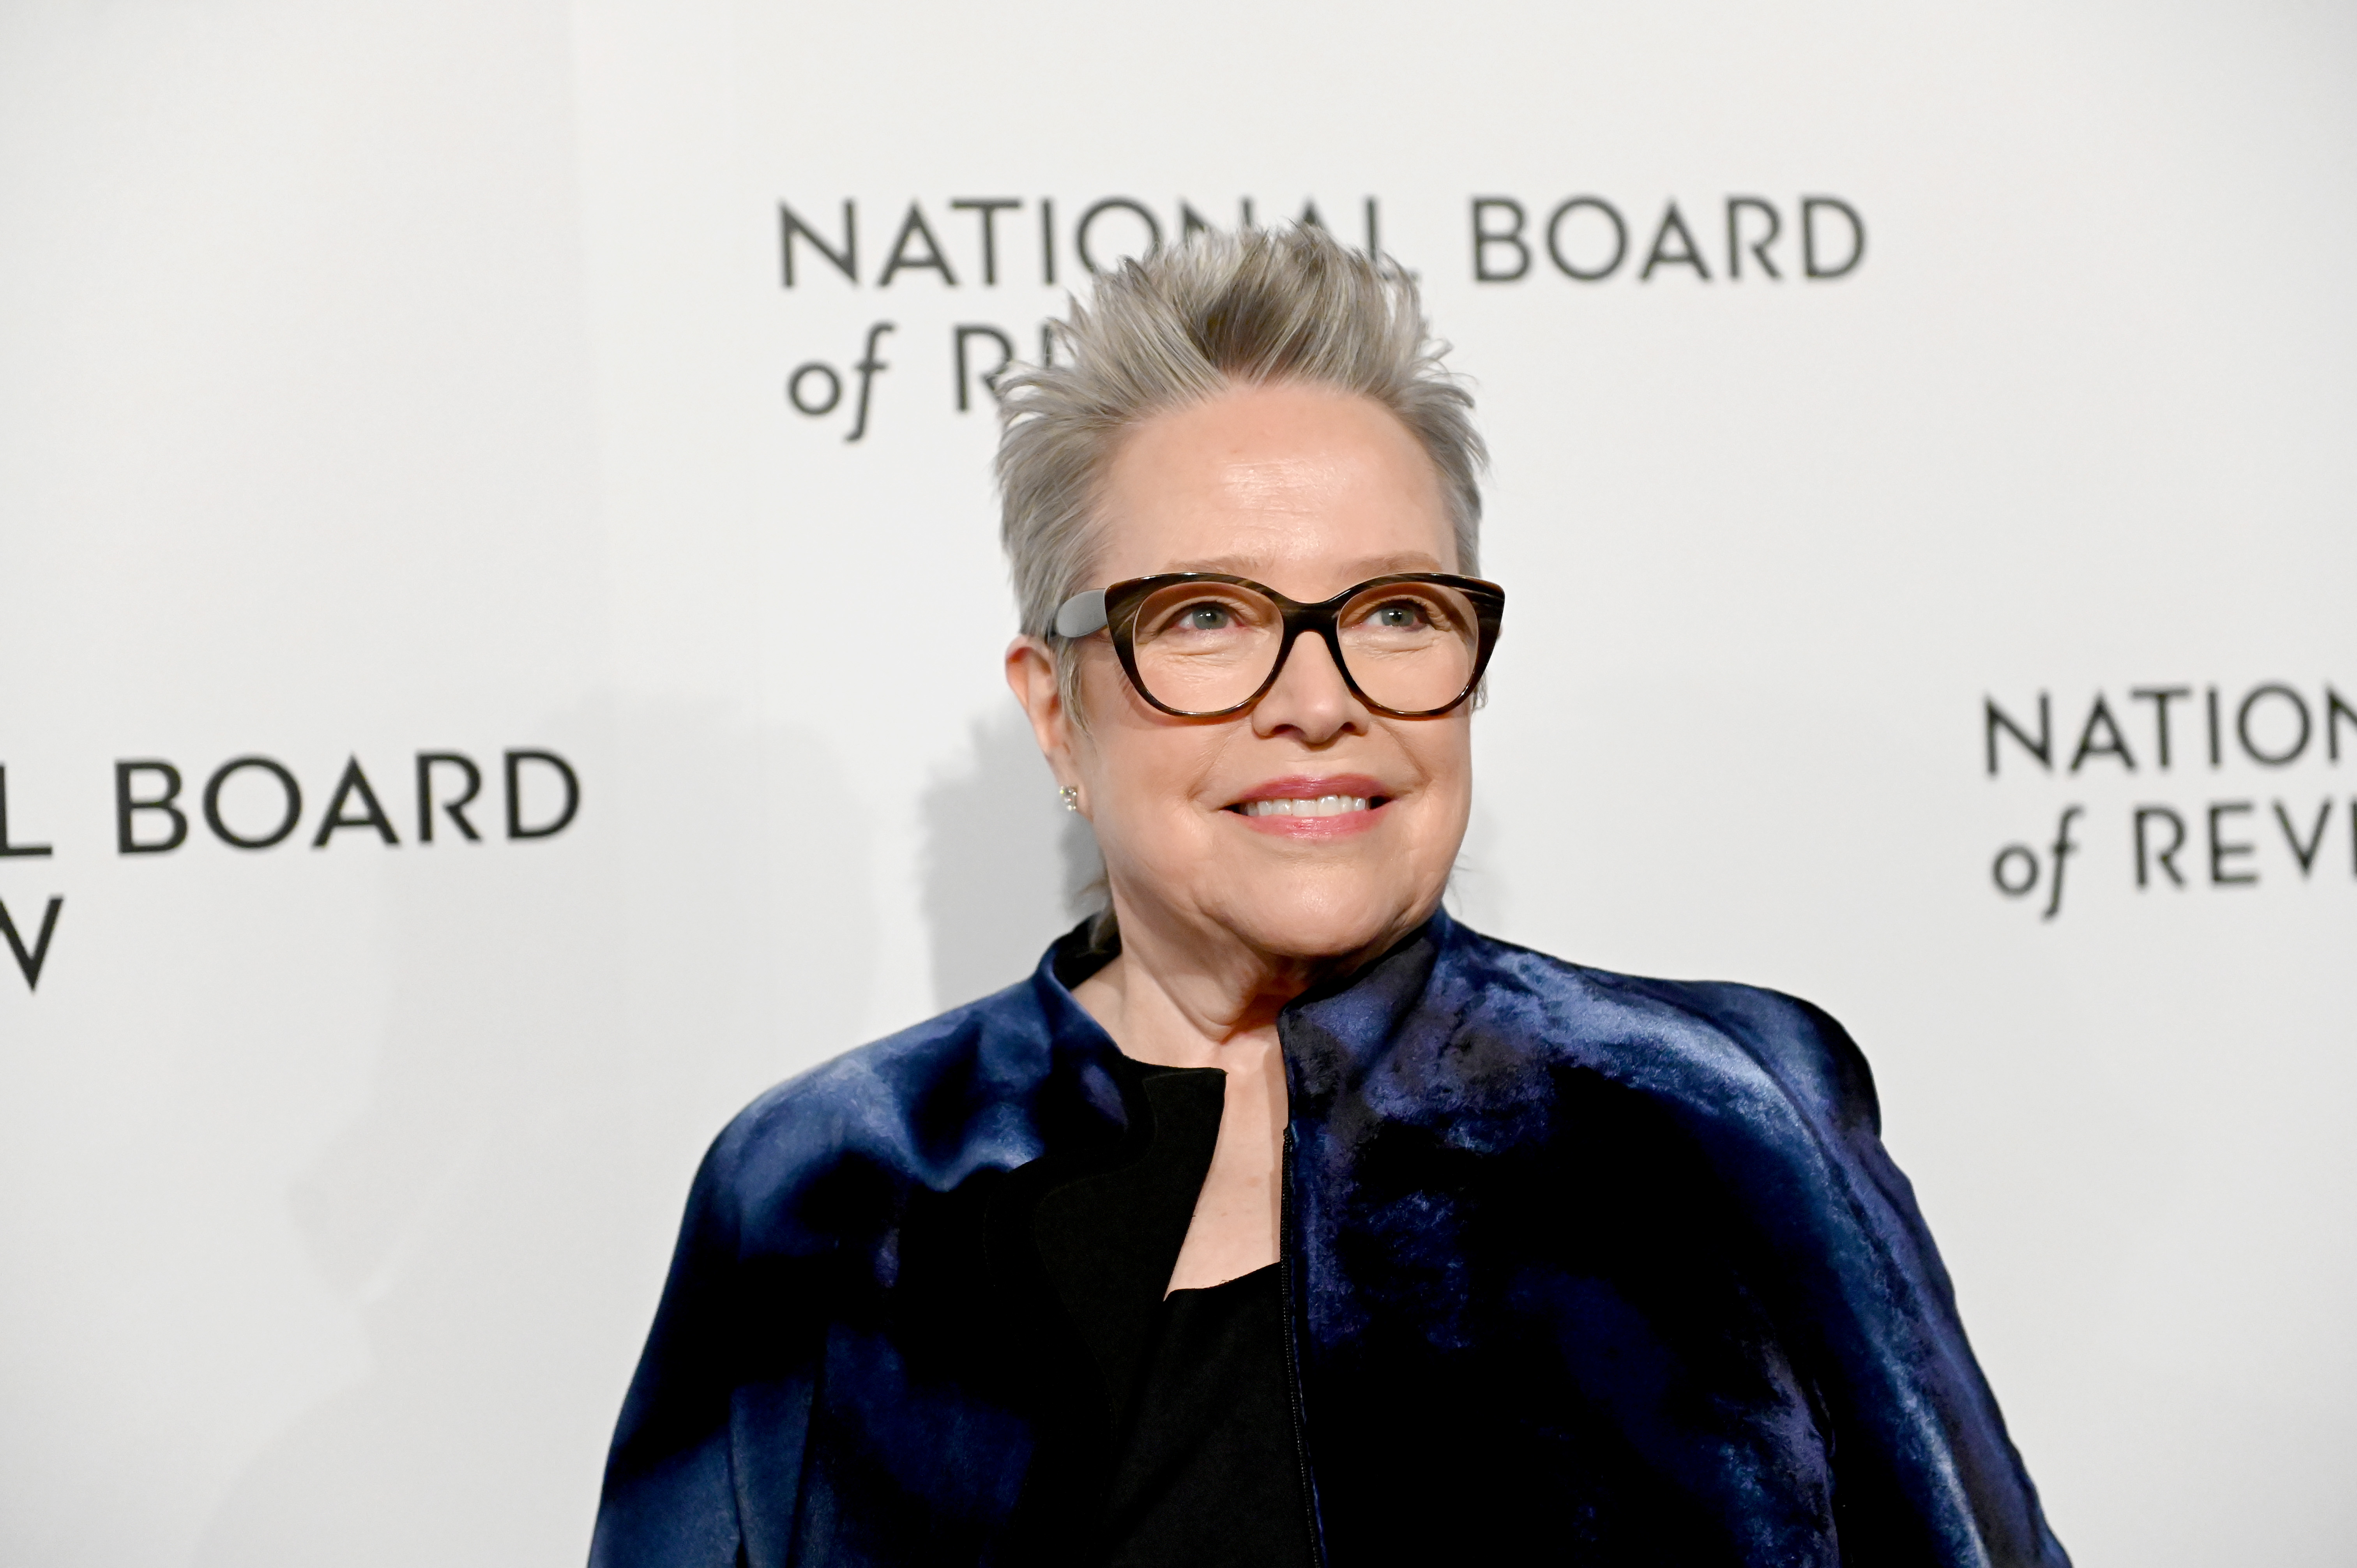 Kathy Bates bei der 2020 National Board of Review Gala am 8. Januar 2020 in New York City. | Quelle: Getty Images